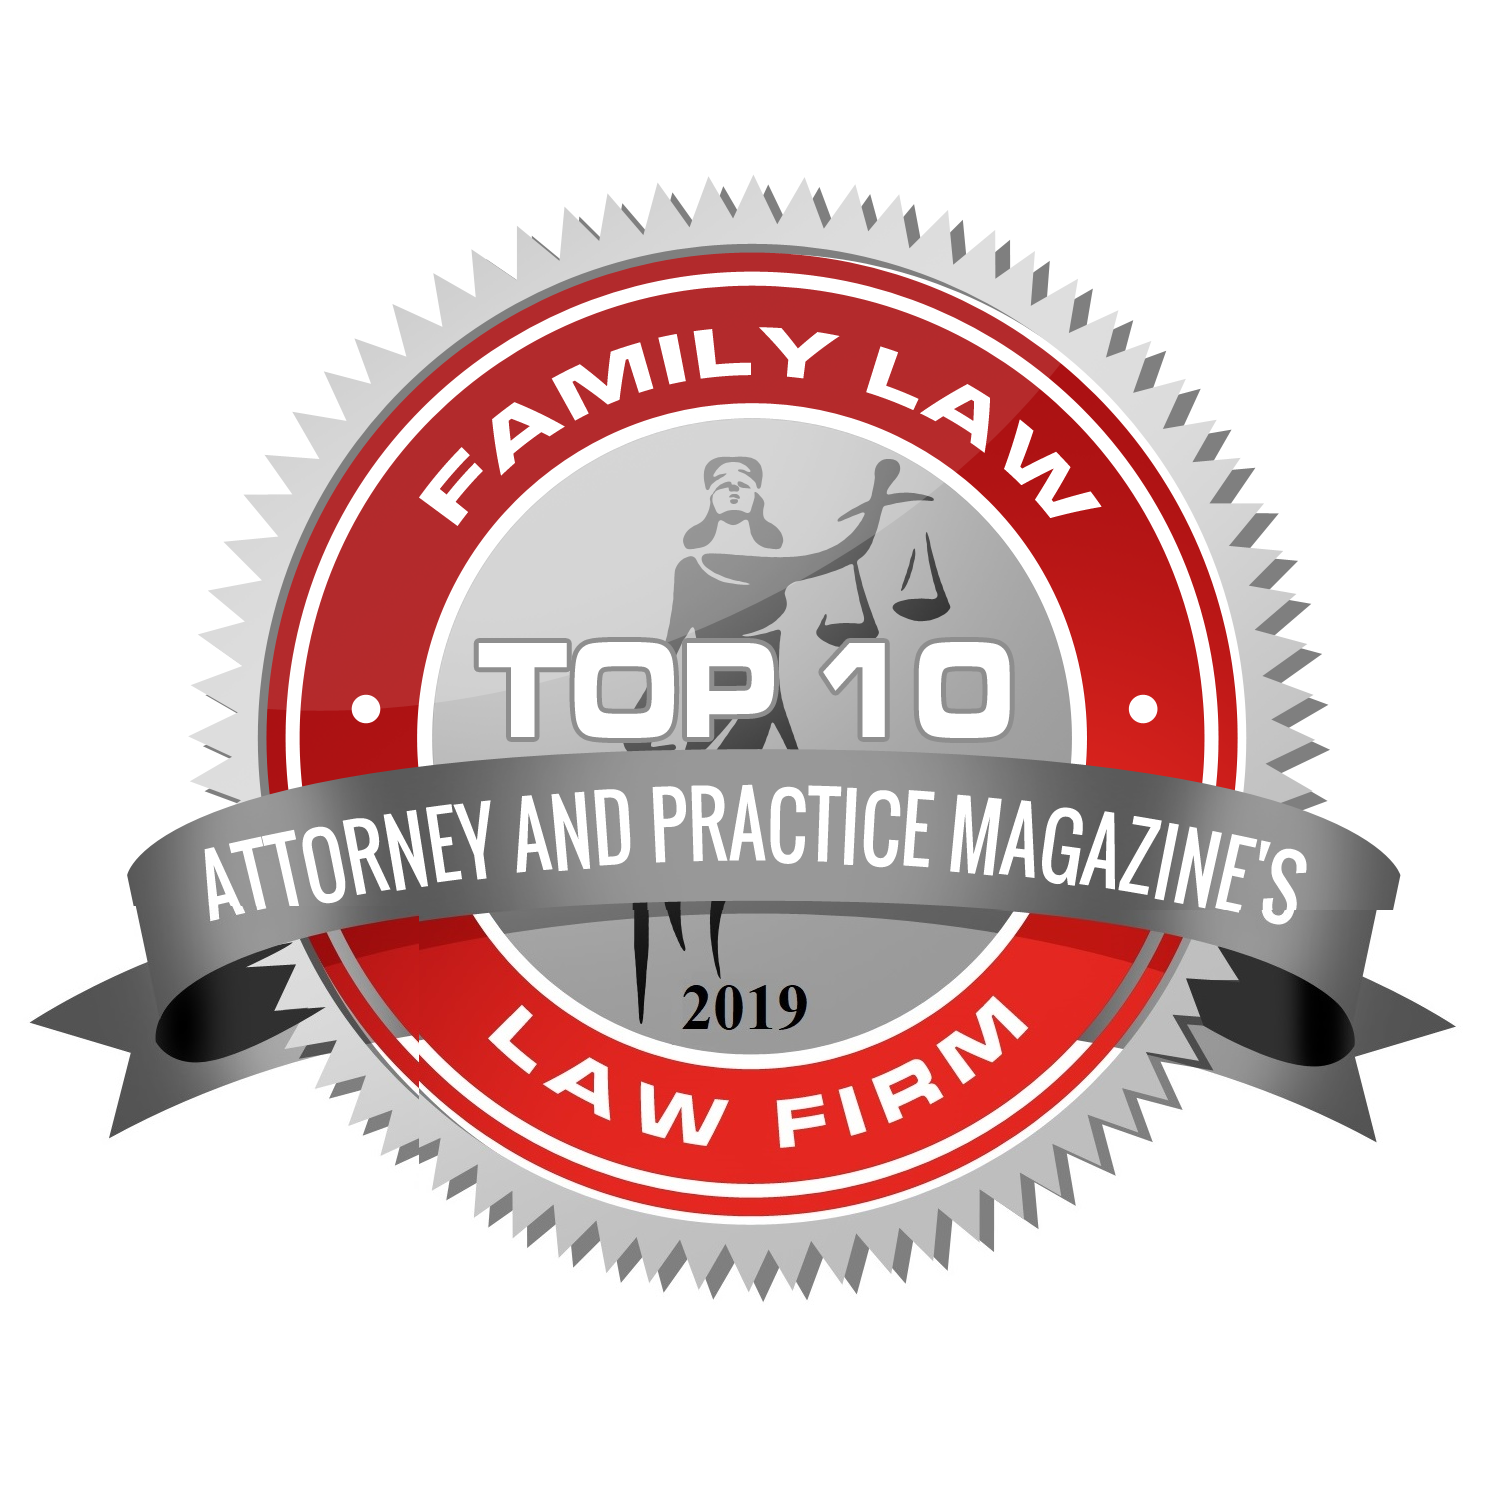 Attorney and Practice Magazine - 2019 Top 10 Family Law Law Firm